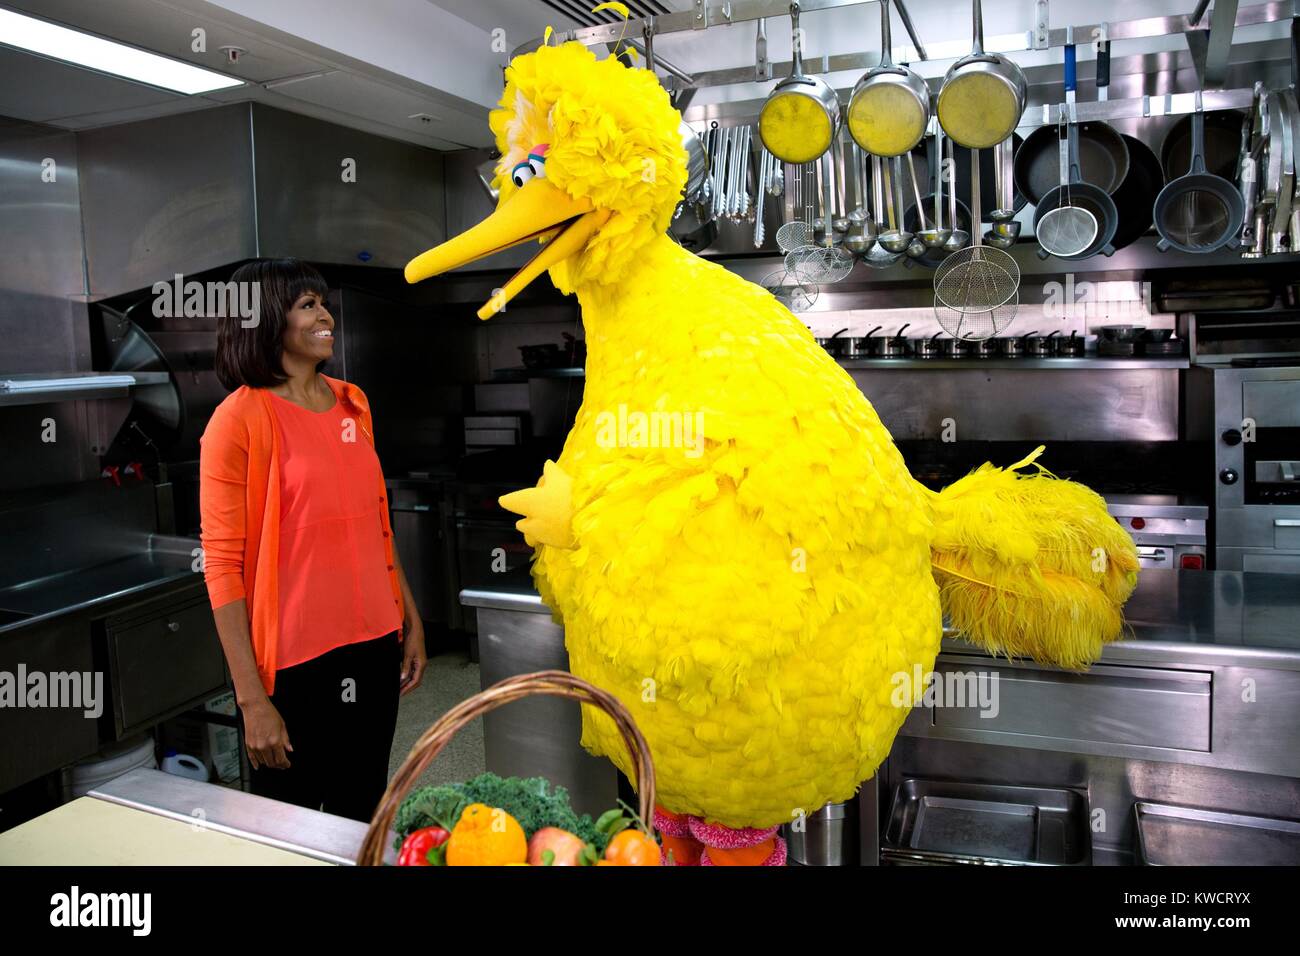 First Lady Michelle Obama with Big Bird in the White House Kitchen, Feb. 13, 2013. They were taping a 'Let’s Move!' and 'Sesame Street' public service announcement. (BSLOC 2015 3 120) Stock Photo